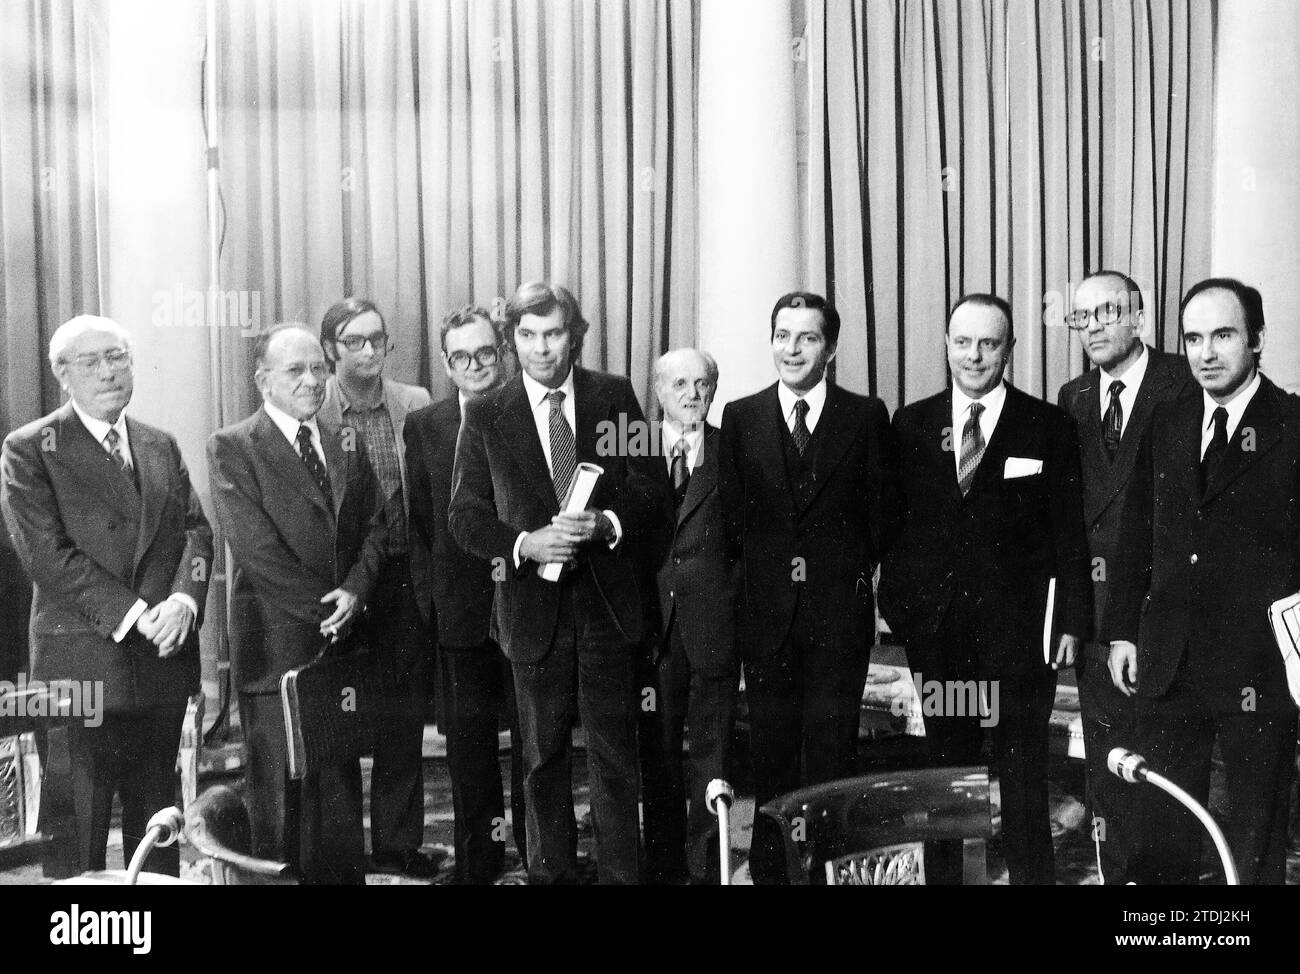 Madrid, 10/25/1977.- The signing of the La Moncloa Pacts contributed to redirecting a climate of concord that had become rarefied in 1977. In the photograph, from left to right: Tierno Galvan, Carrillo, Triginer, Raventós, González , Ajuriaguerra, Adolfo Suárez, Fraga, Calvo Sotelo and Miquel Roca. Credit: Album / Archivo ABC / Luis Alonso Stock Photo